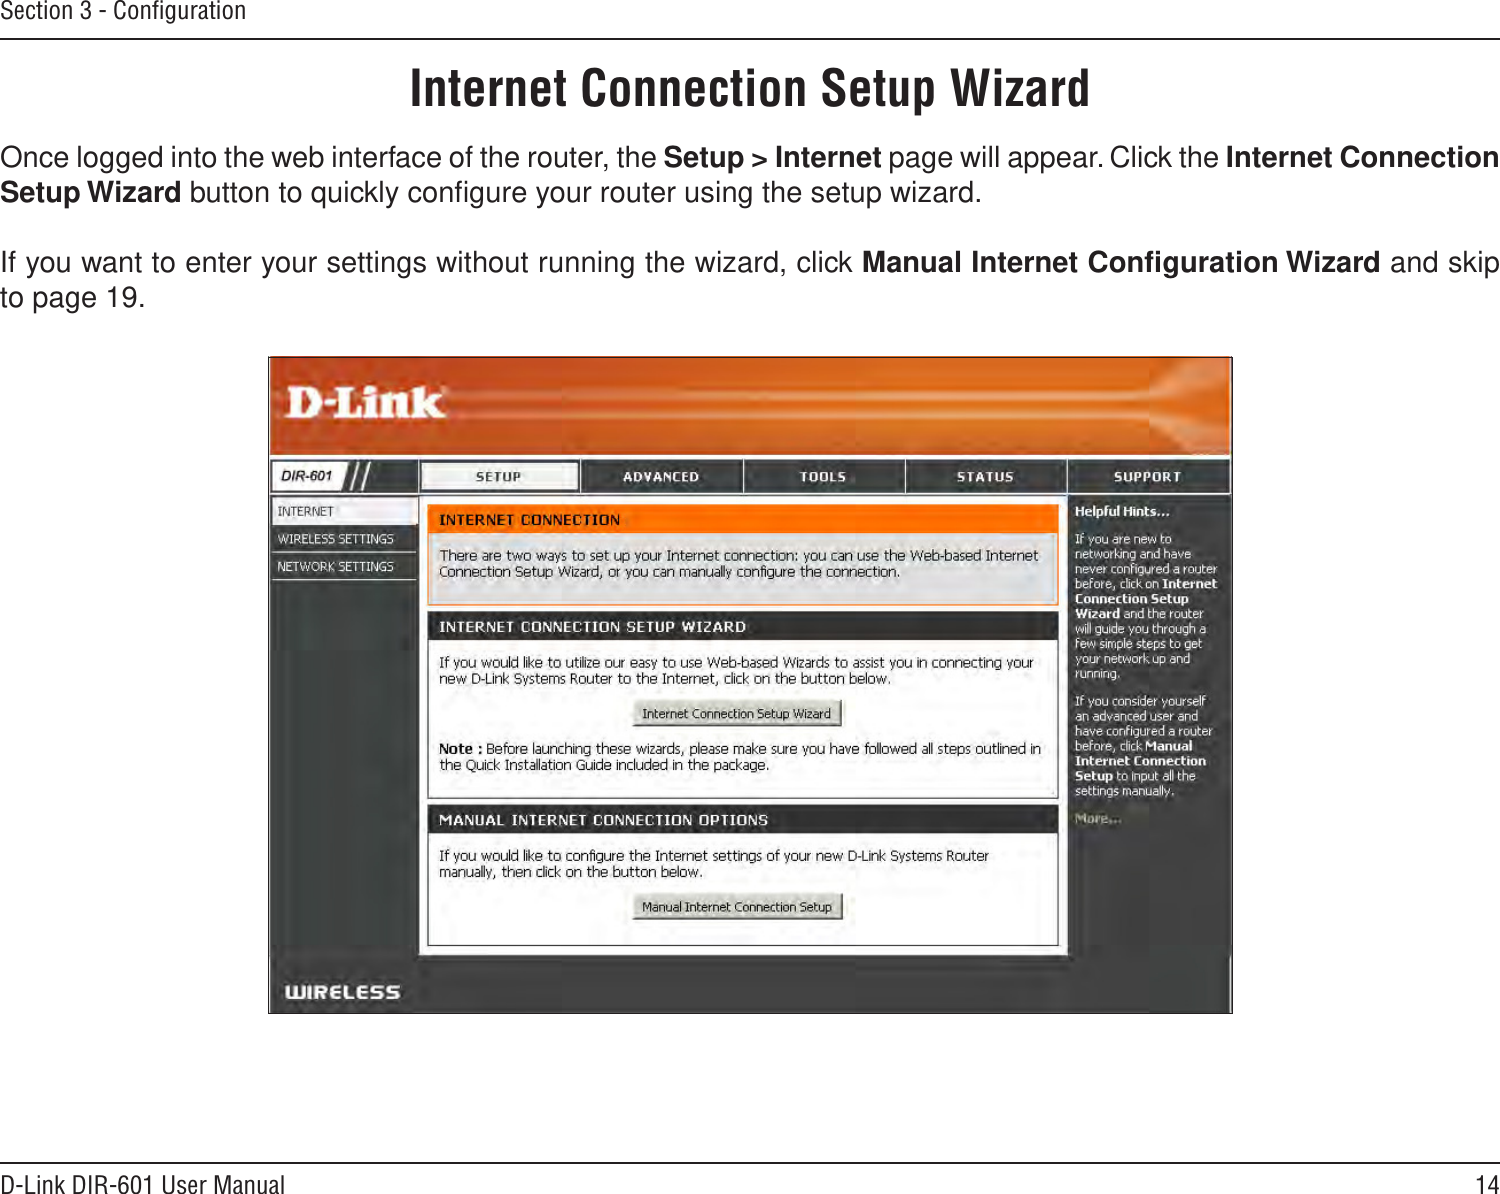 14D-Link DIR-601 User ManualSection 3 - ConﬁgurationInternet Connection Setup WizardOnce logged into the web interface of the router, the Setup &gt; Internet page will appear. Click the Internet Connection Setup Wizard button to quickly conﬁgure your router using the setup wizard.If you want to enter your settings without running the wizard, click Manual Internet Conﬁguration Wizard and skip to page 19.